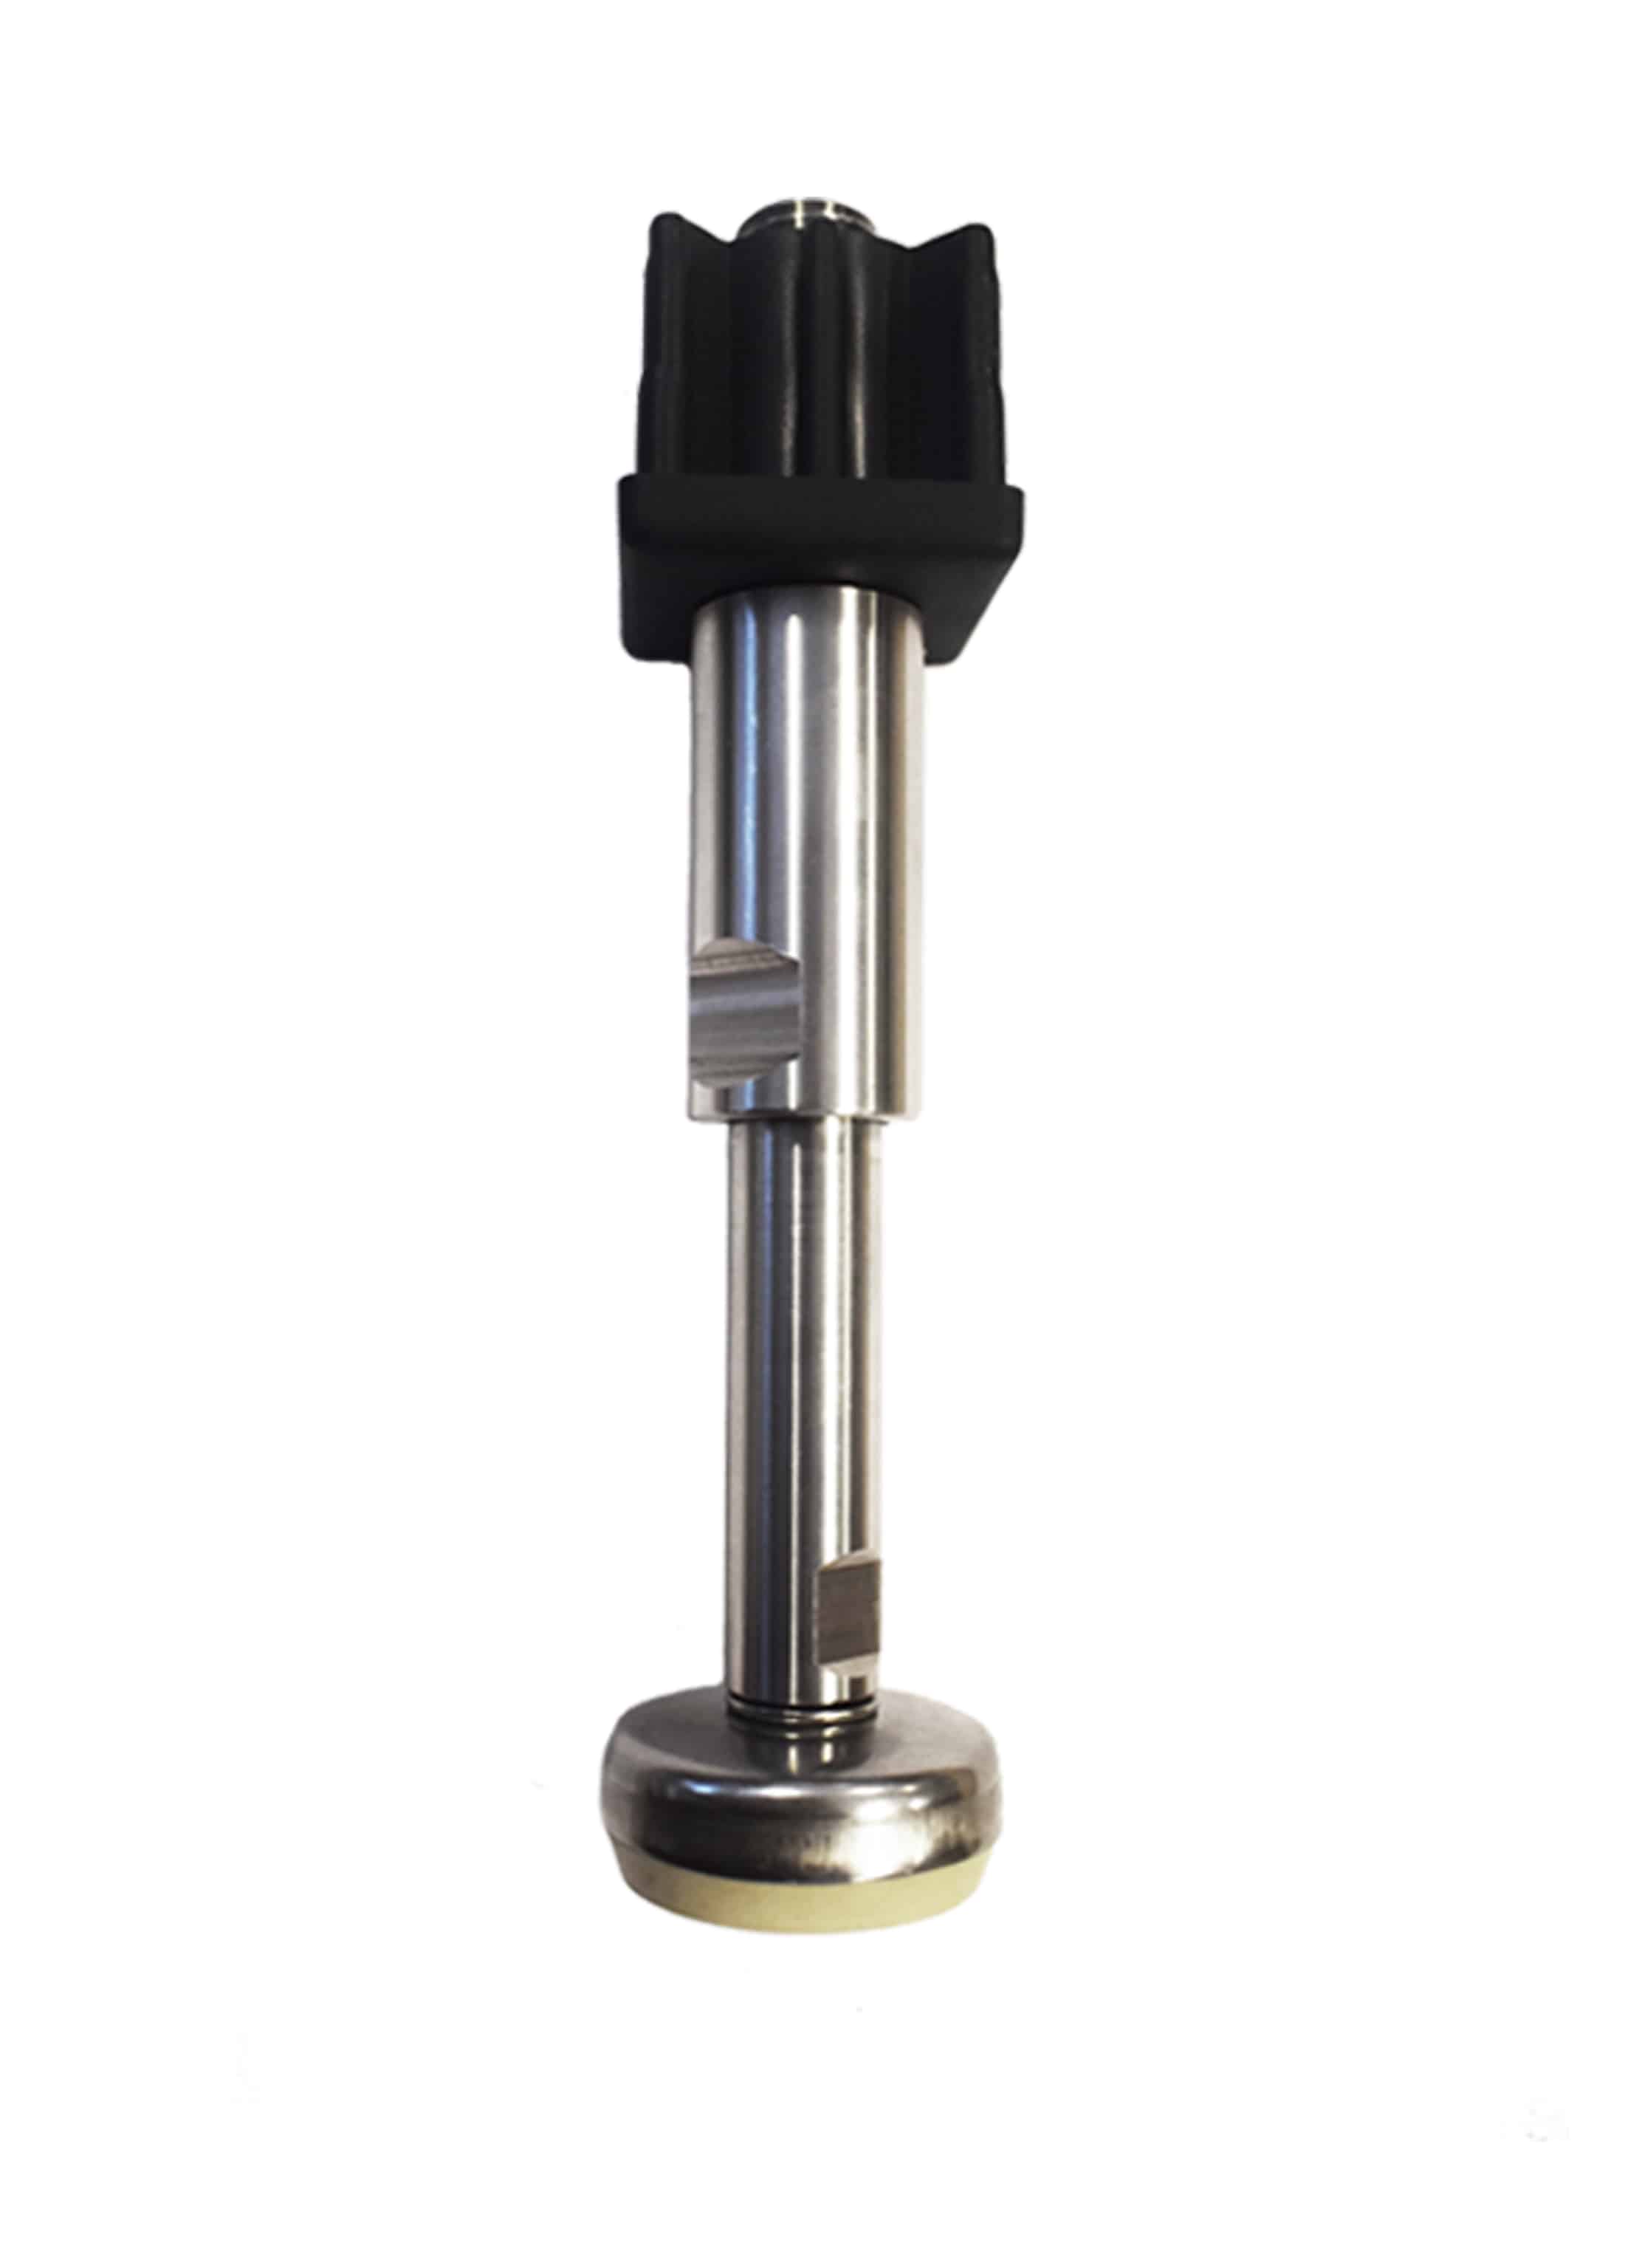 Stainless steel hygienic tall foot for heavy duty tables